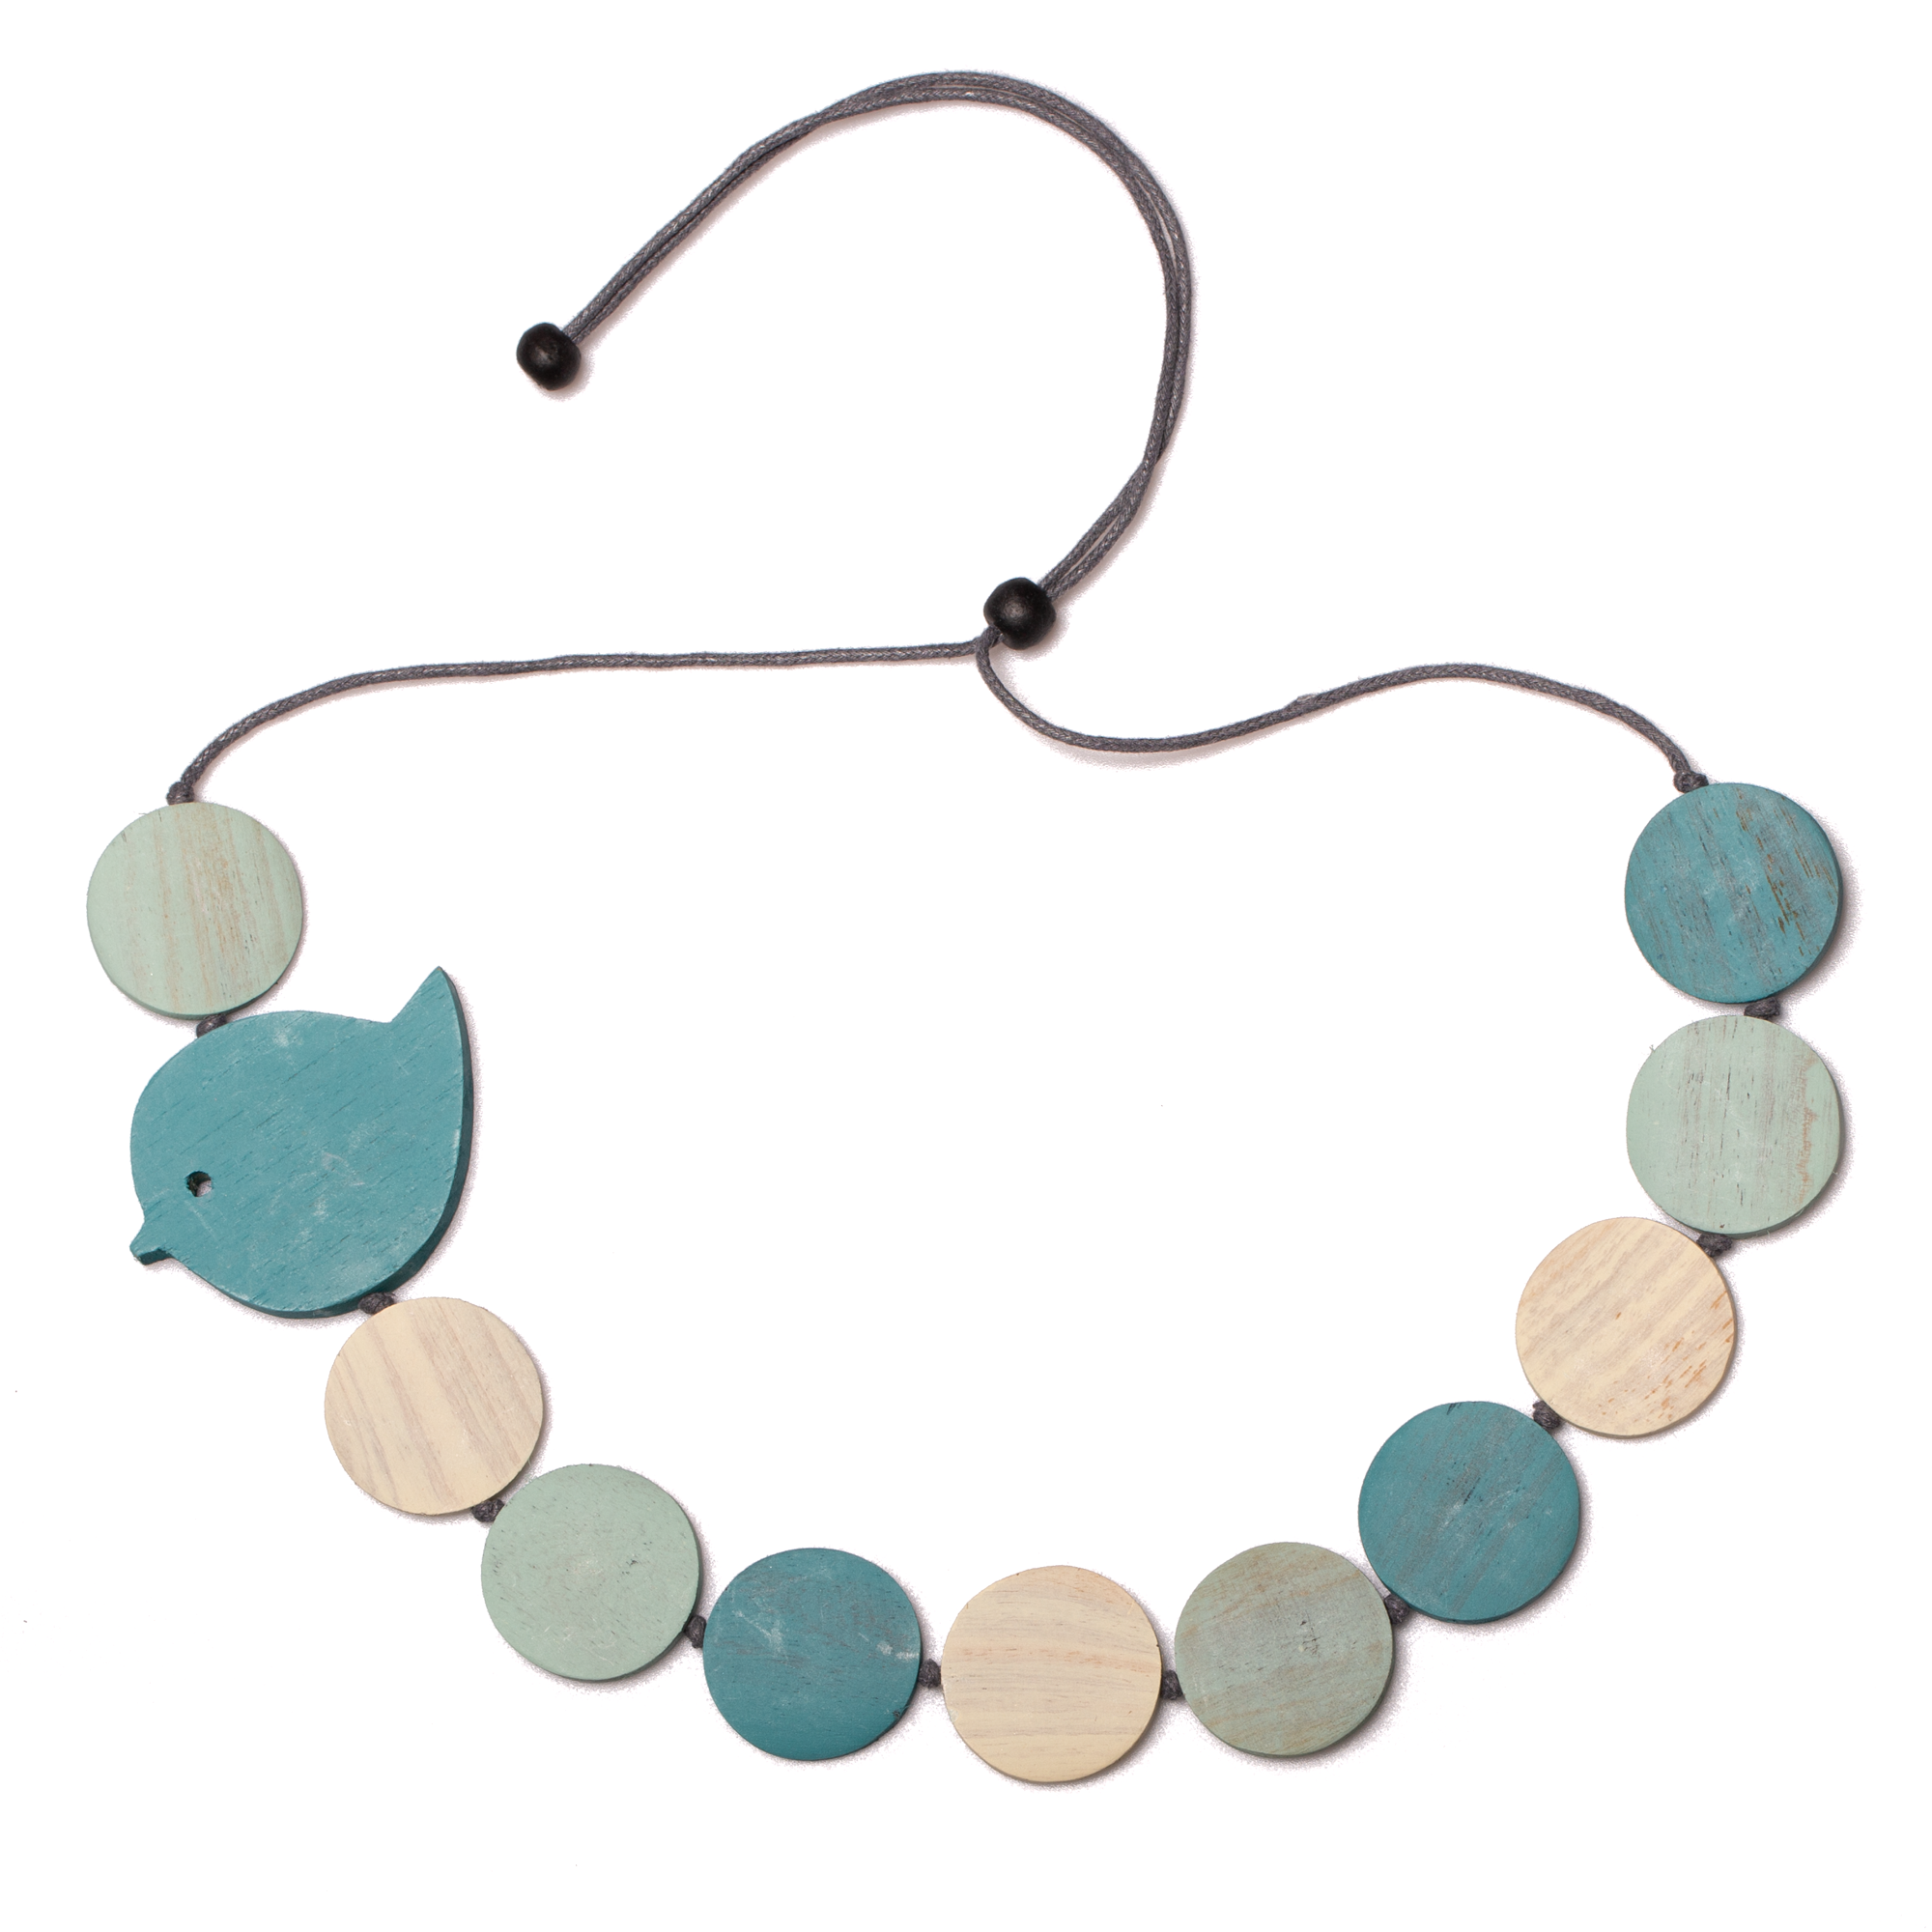 Teal Tones Fat Bird On Wooden Disc Necklace